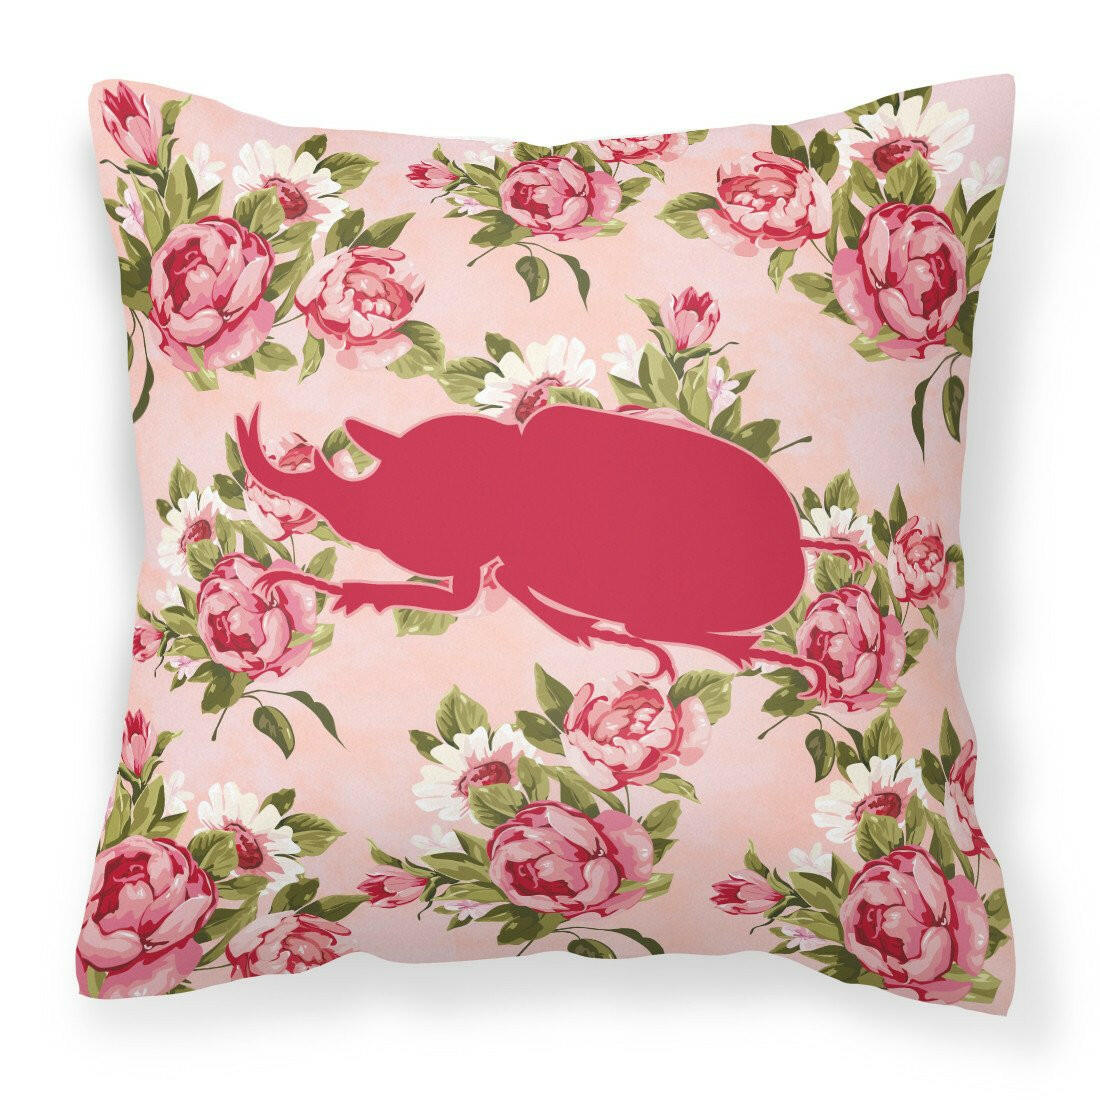 Beetle Shabby Chic Pink Roses  Fabric Decorative Pillow BB1064-RS-PK-PW1414 - the-store.com